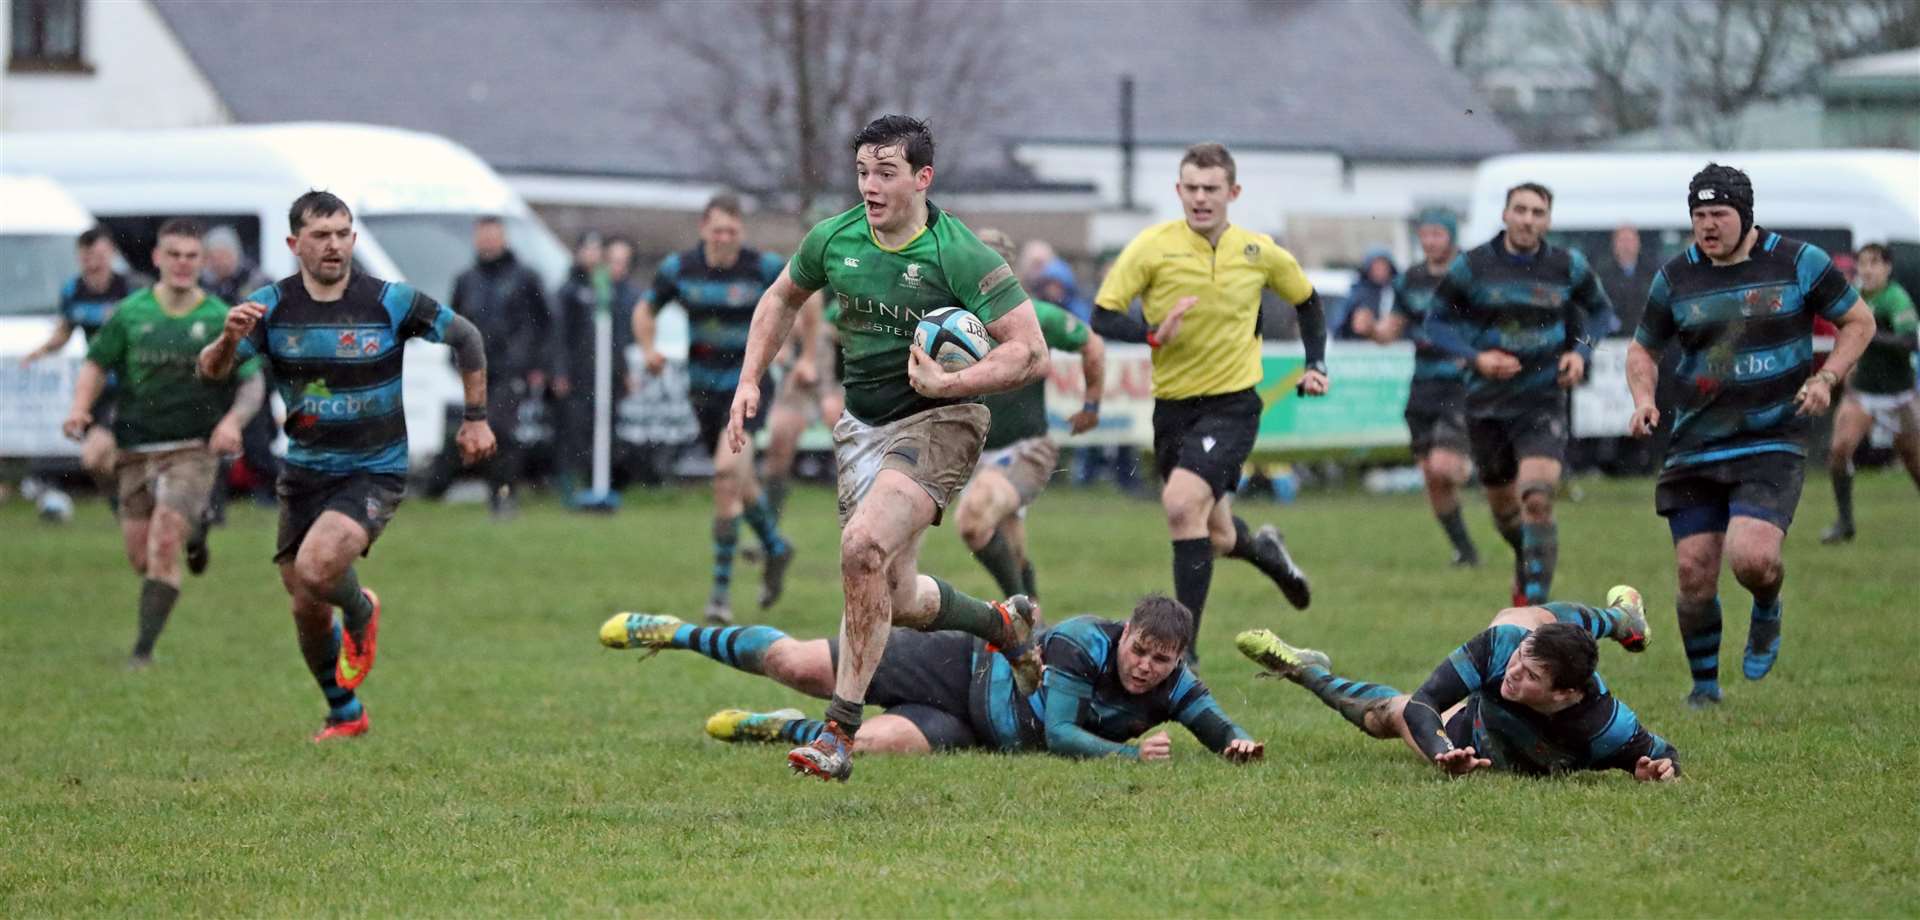 Jordan Miller leaves the Carrick defence in his wake as he scores a brilliant try for Caithness. Picture: James Gunn